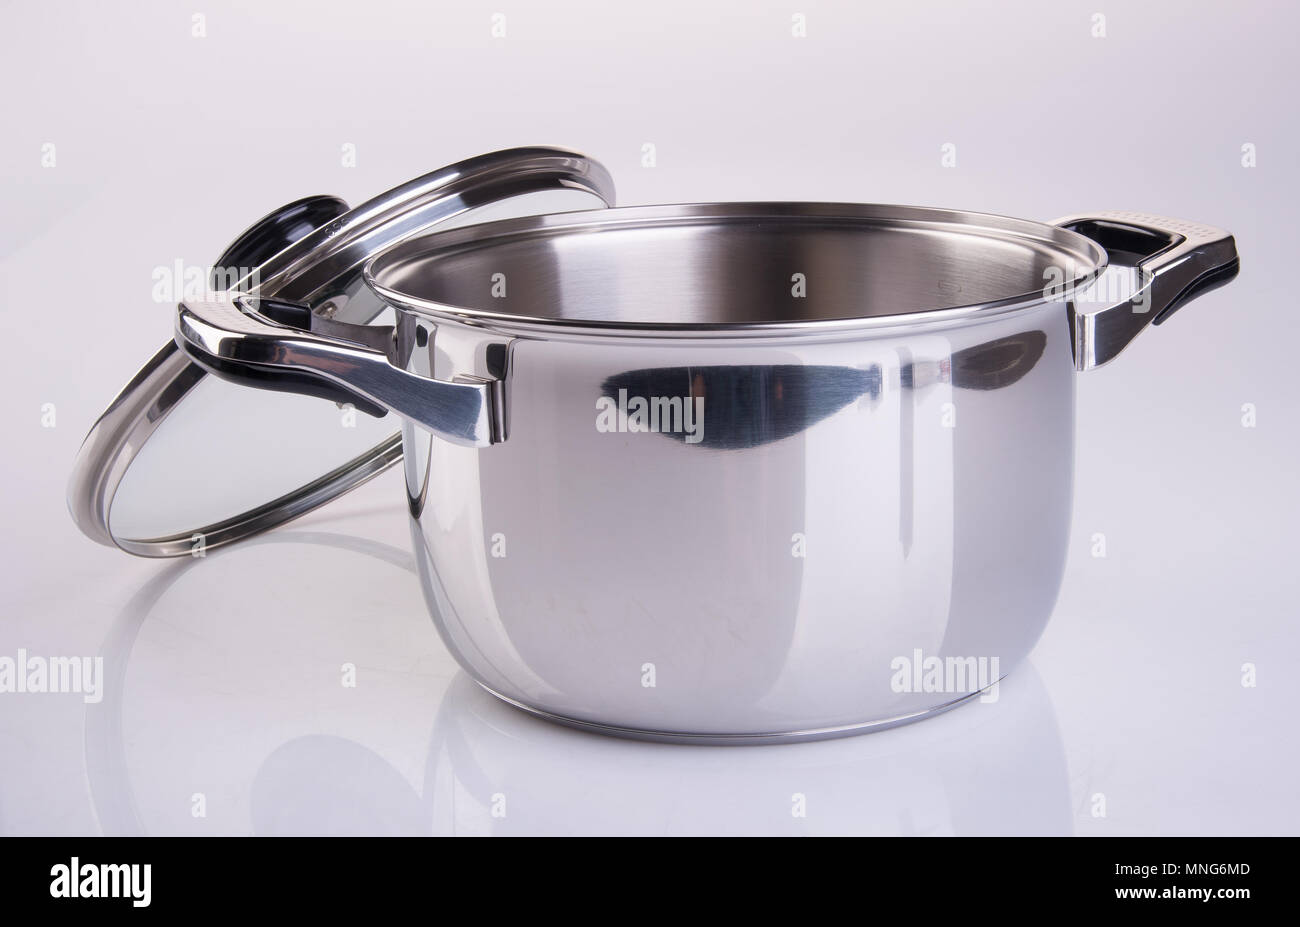 https://c8.alamy.com/comp/MNG6MD/pot-or-stainless-steel-cooking-pot-on-a-background-MNG6MD.jpg